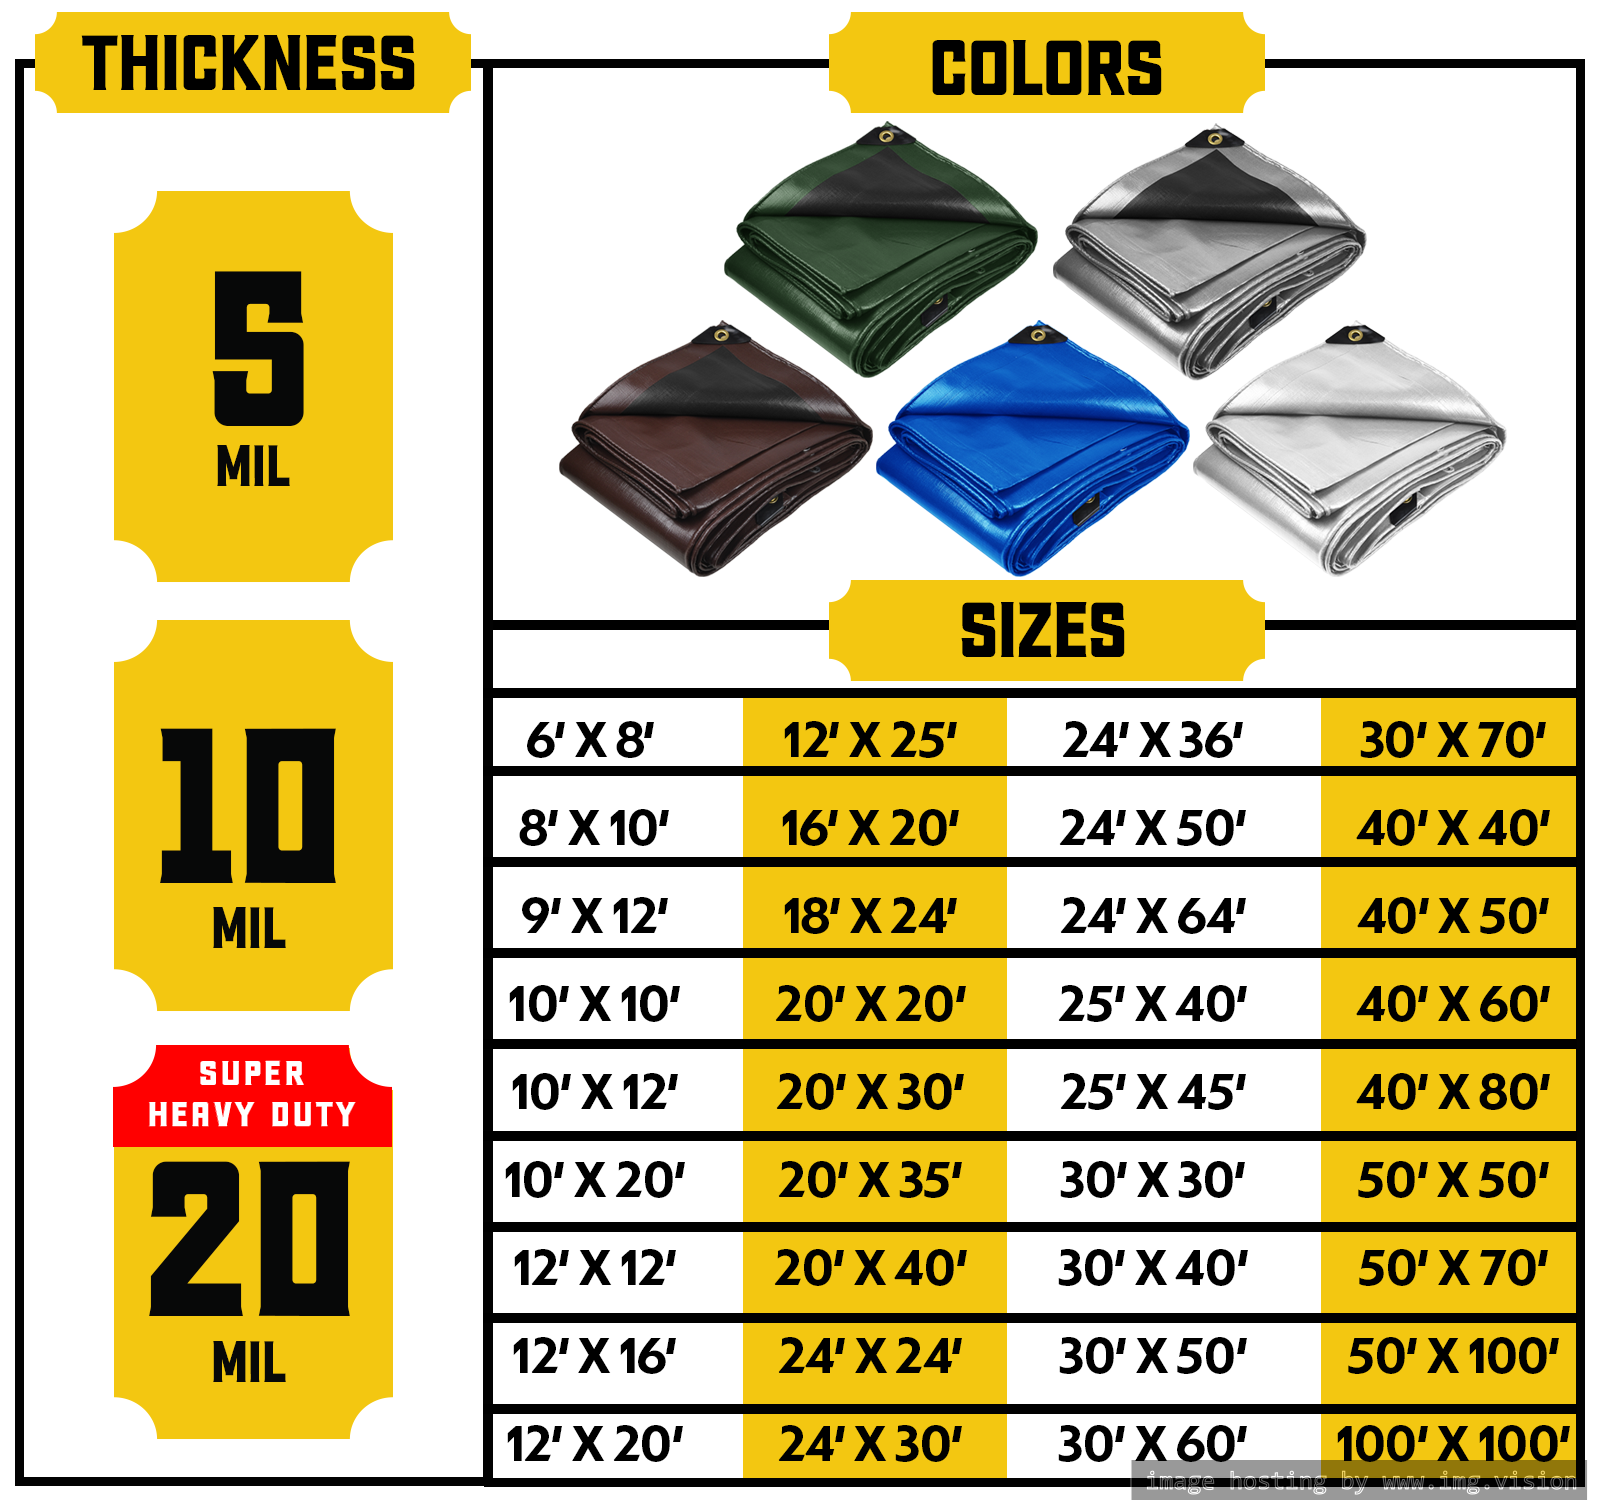 Core Tarps Extreme Heavy Duty 20 Mil Tarp Cover 50′ X 50′ White UV Resistant, Rip and Tear Proof.